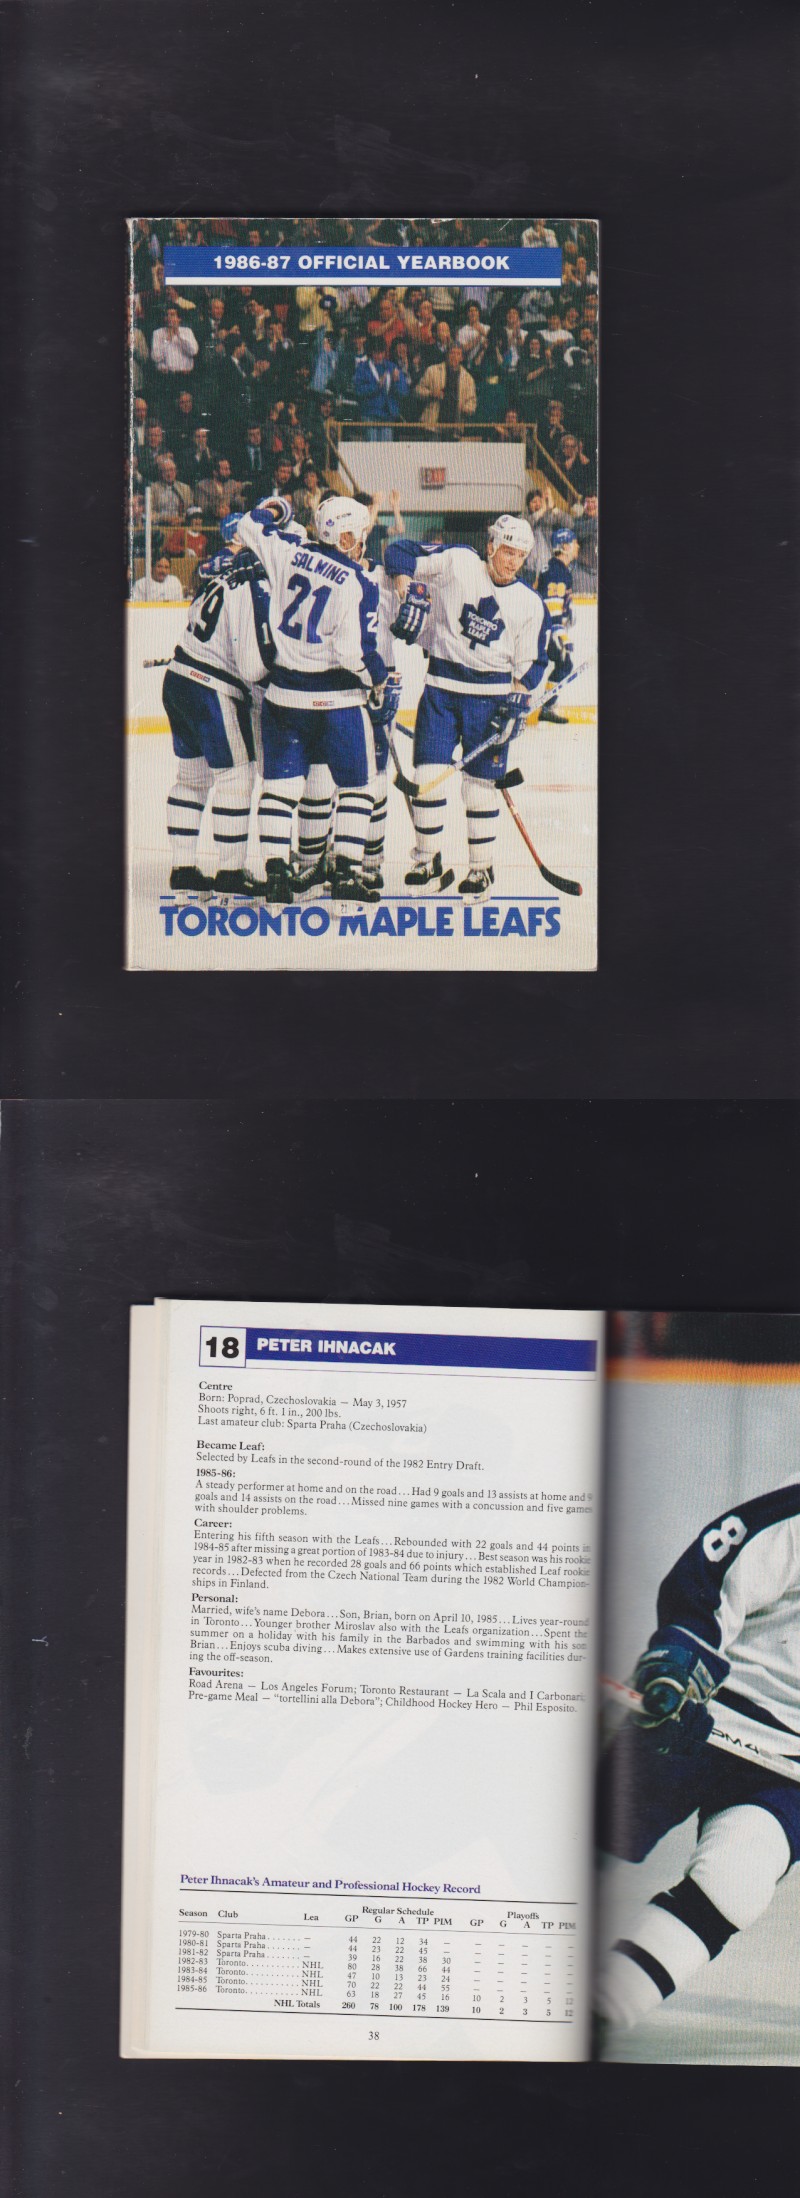 1986-87 TORONTO MAPLE LEAFS YEARBOOK photo